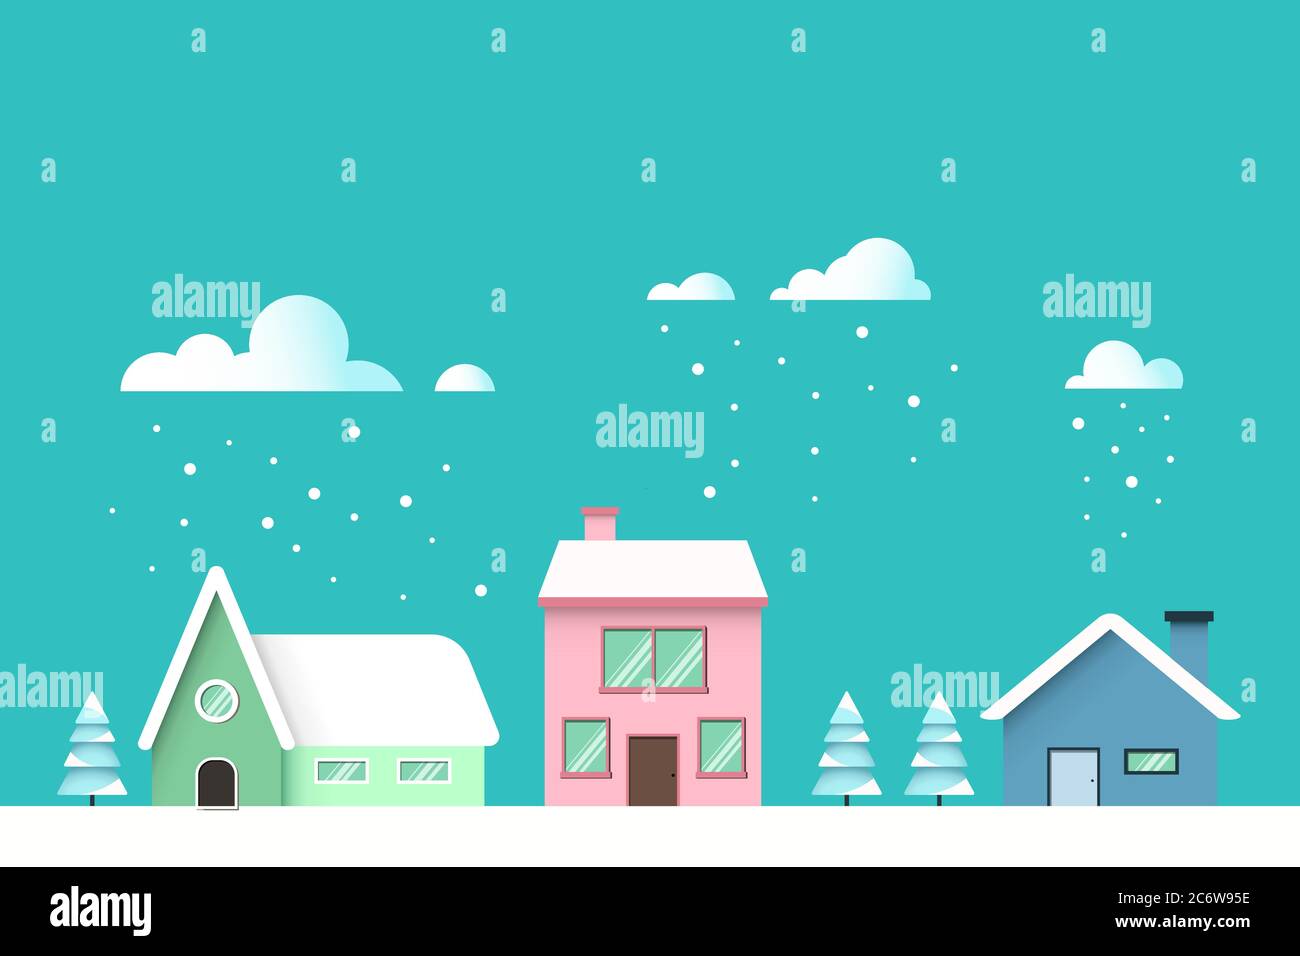 vector illustration of a Christmas winter landscape with a house in the village. Snowy street, greetings card template design. Stock Vector